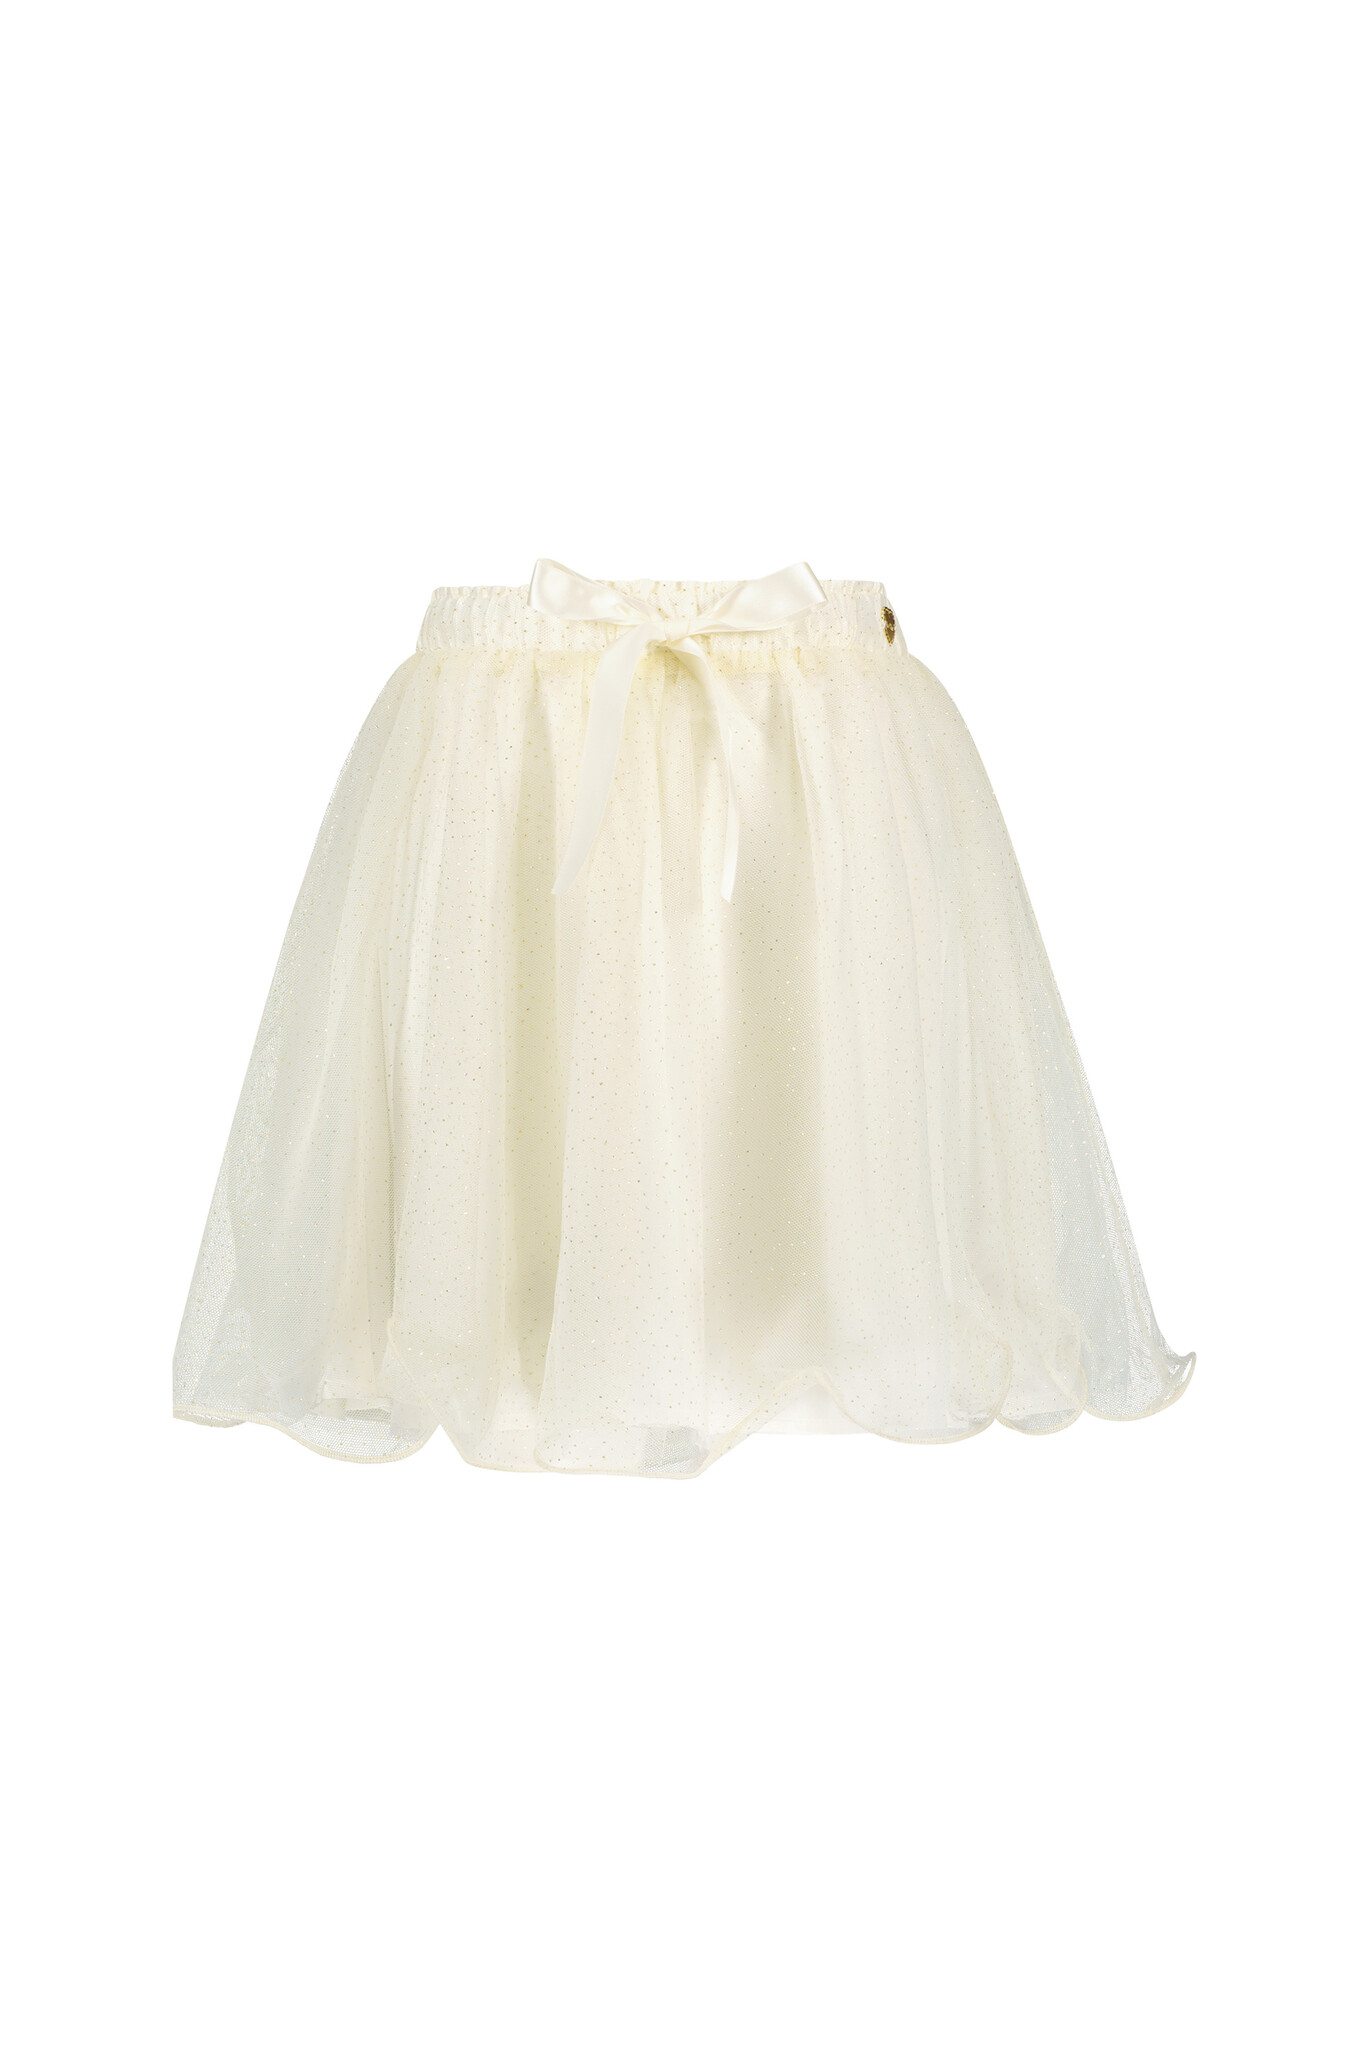 Le Chic C312-5702 Meisjes Rok - Pearled Ivory - Maat 110